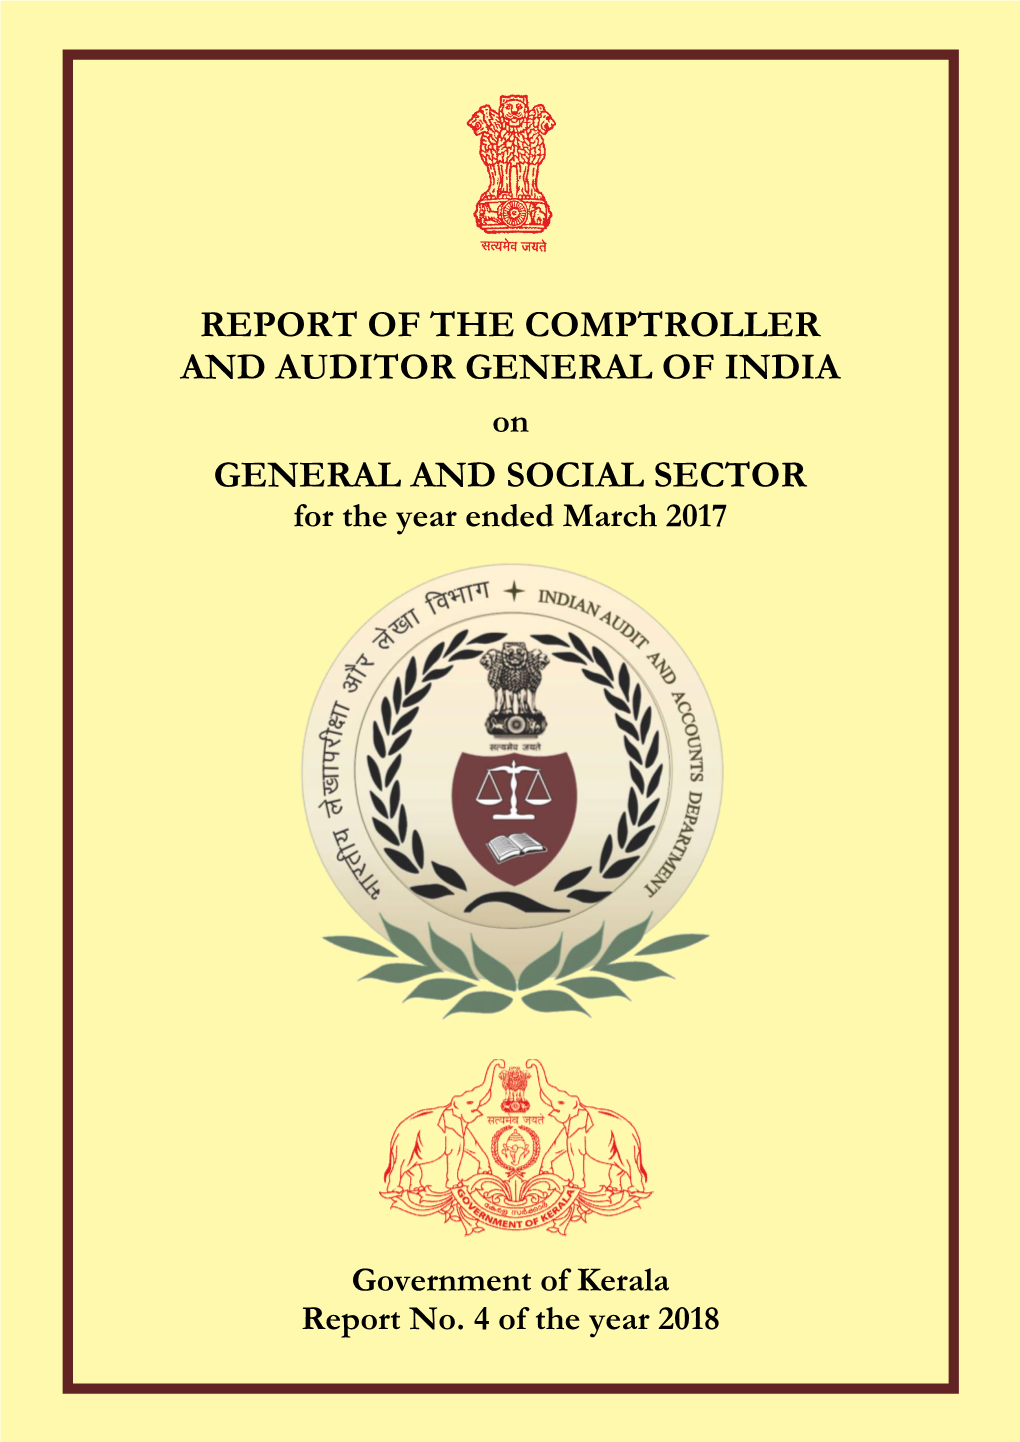 General and Social Sector Government of Kerala